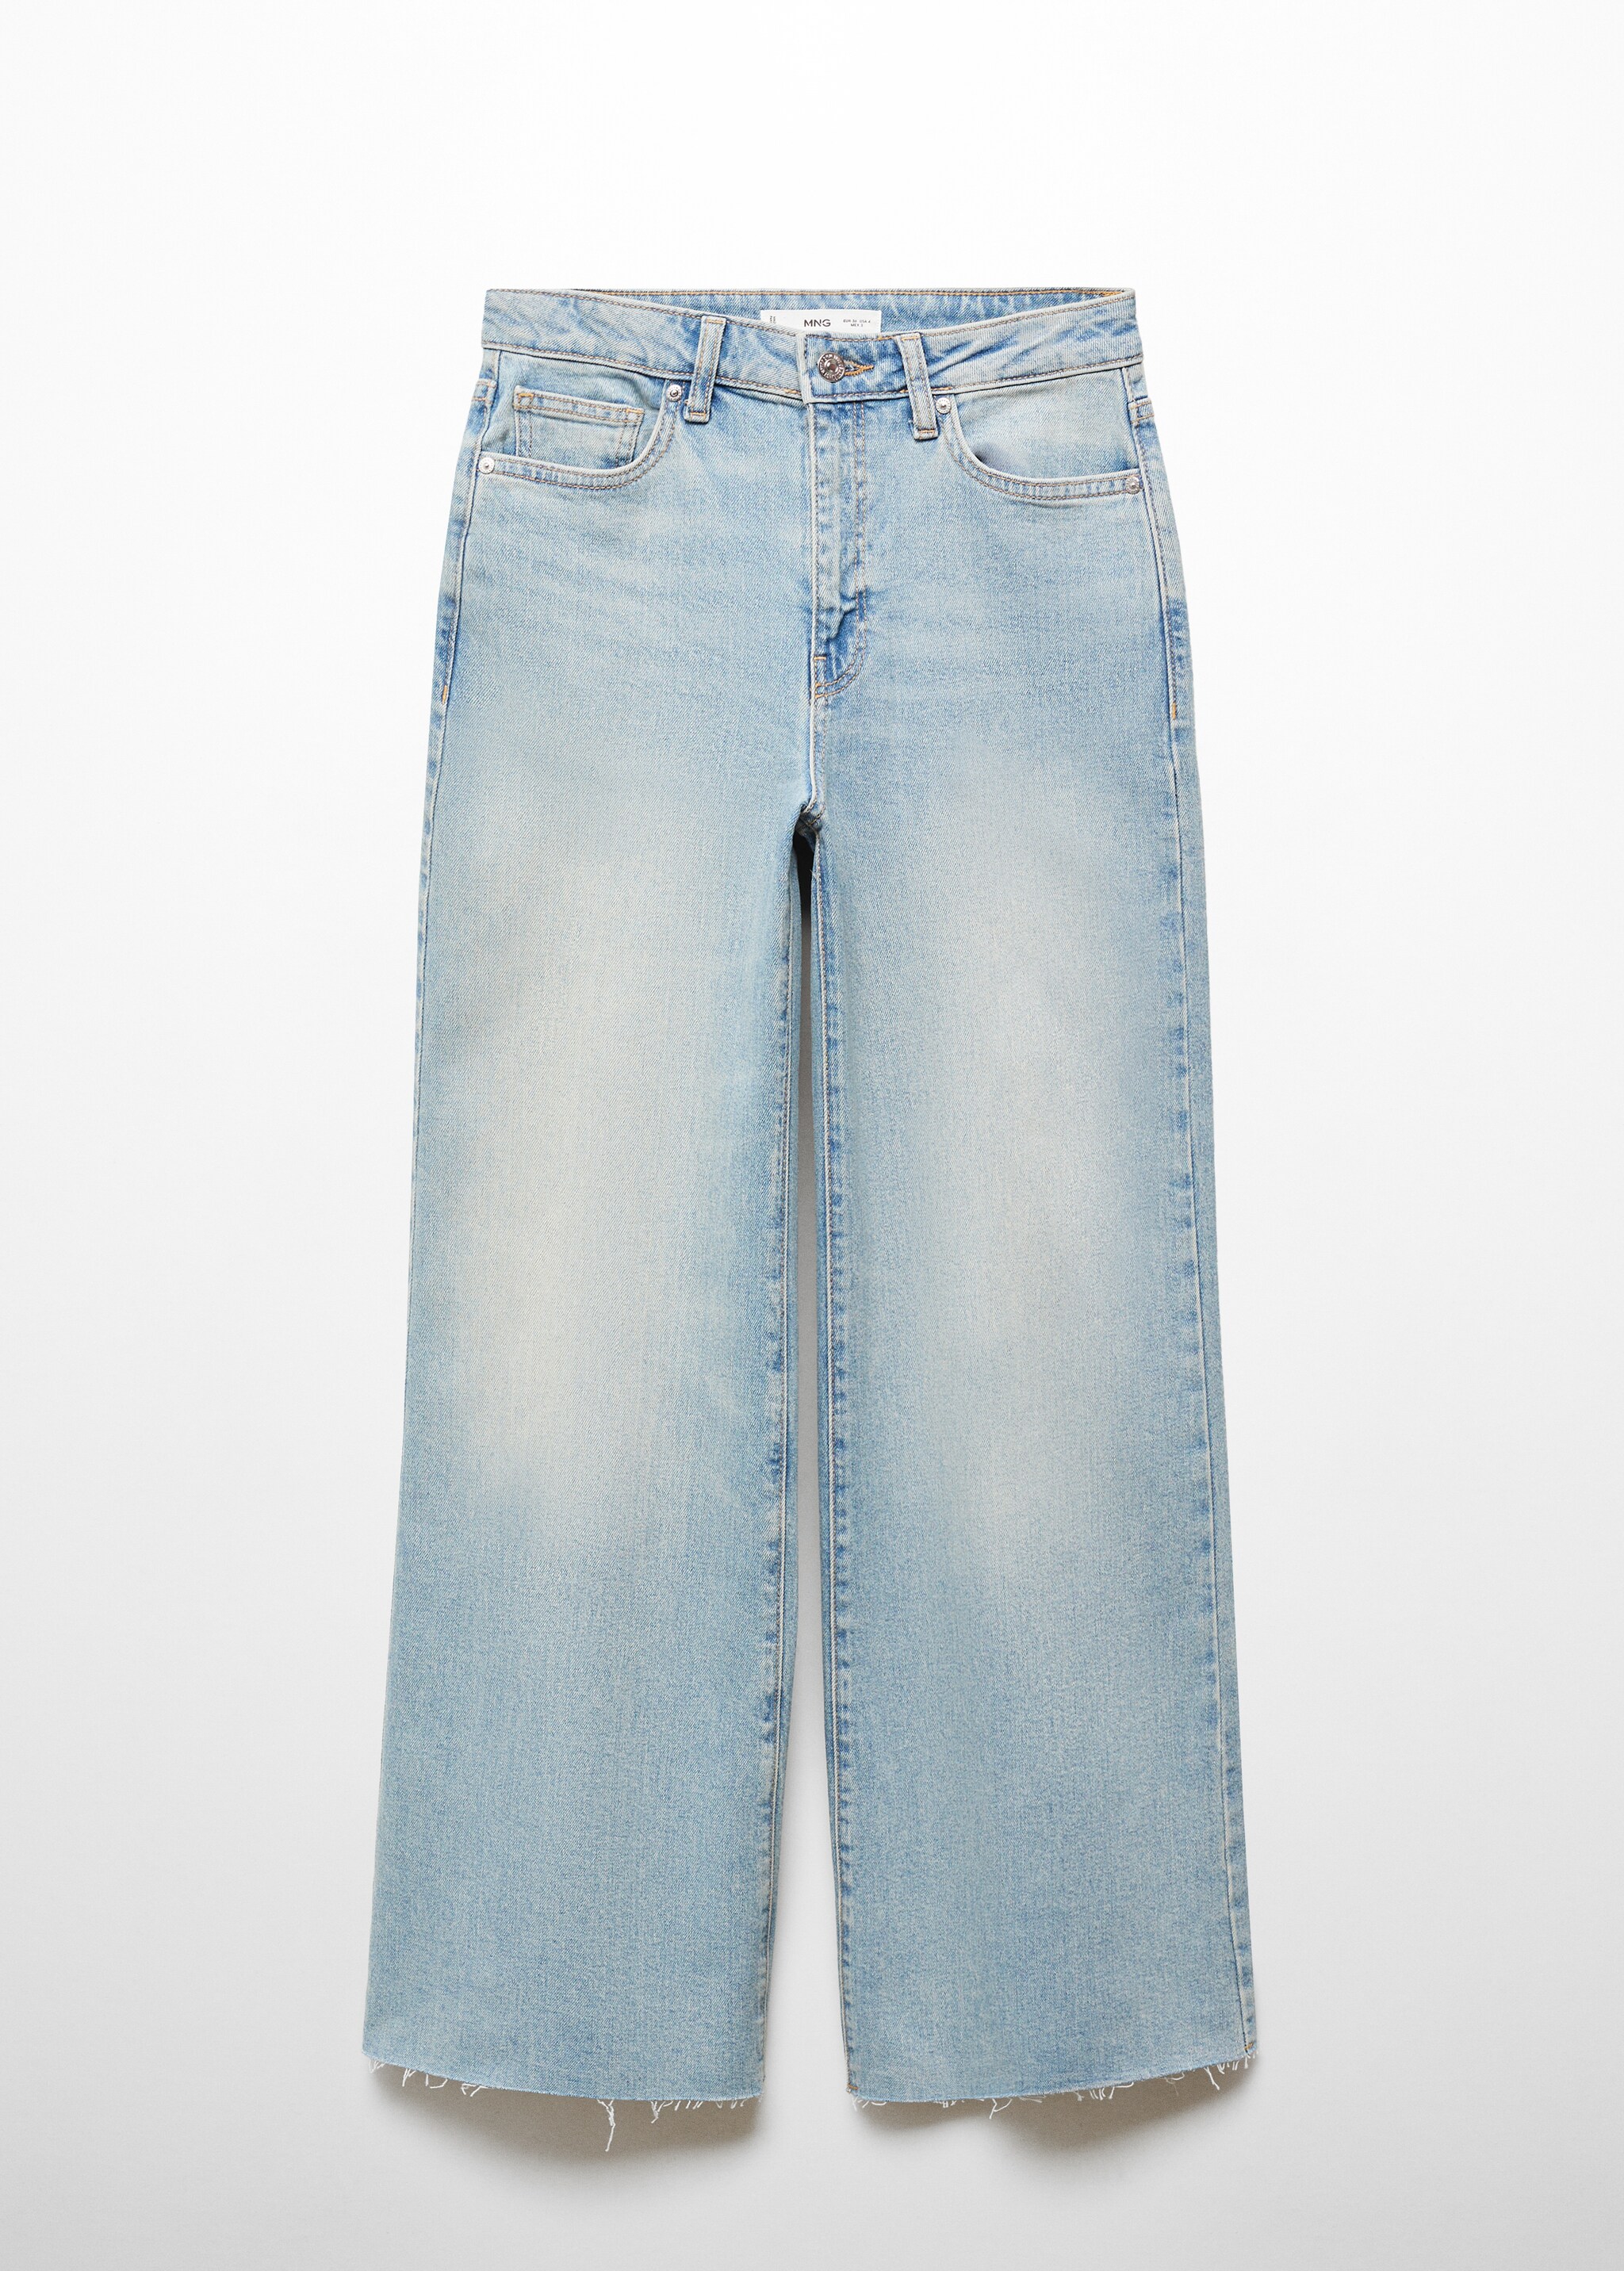 Wideleg mid-rise jeans - Article without model